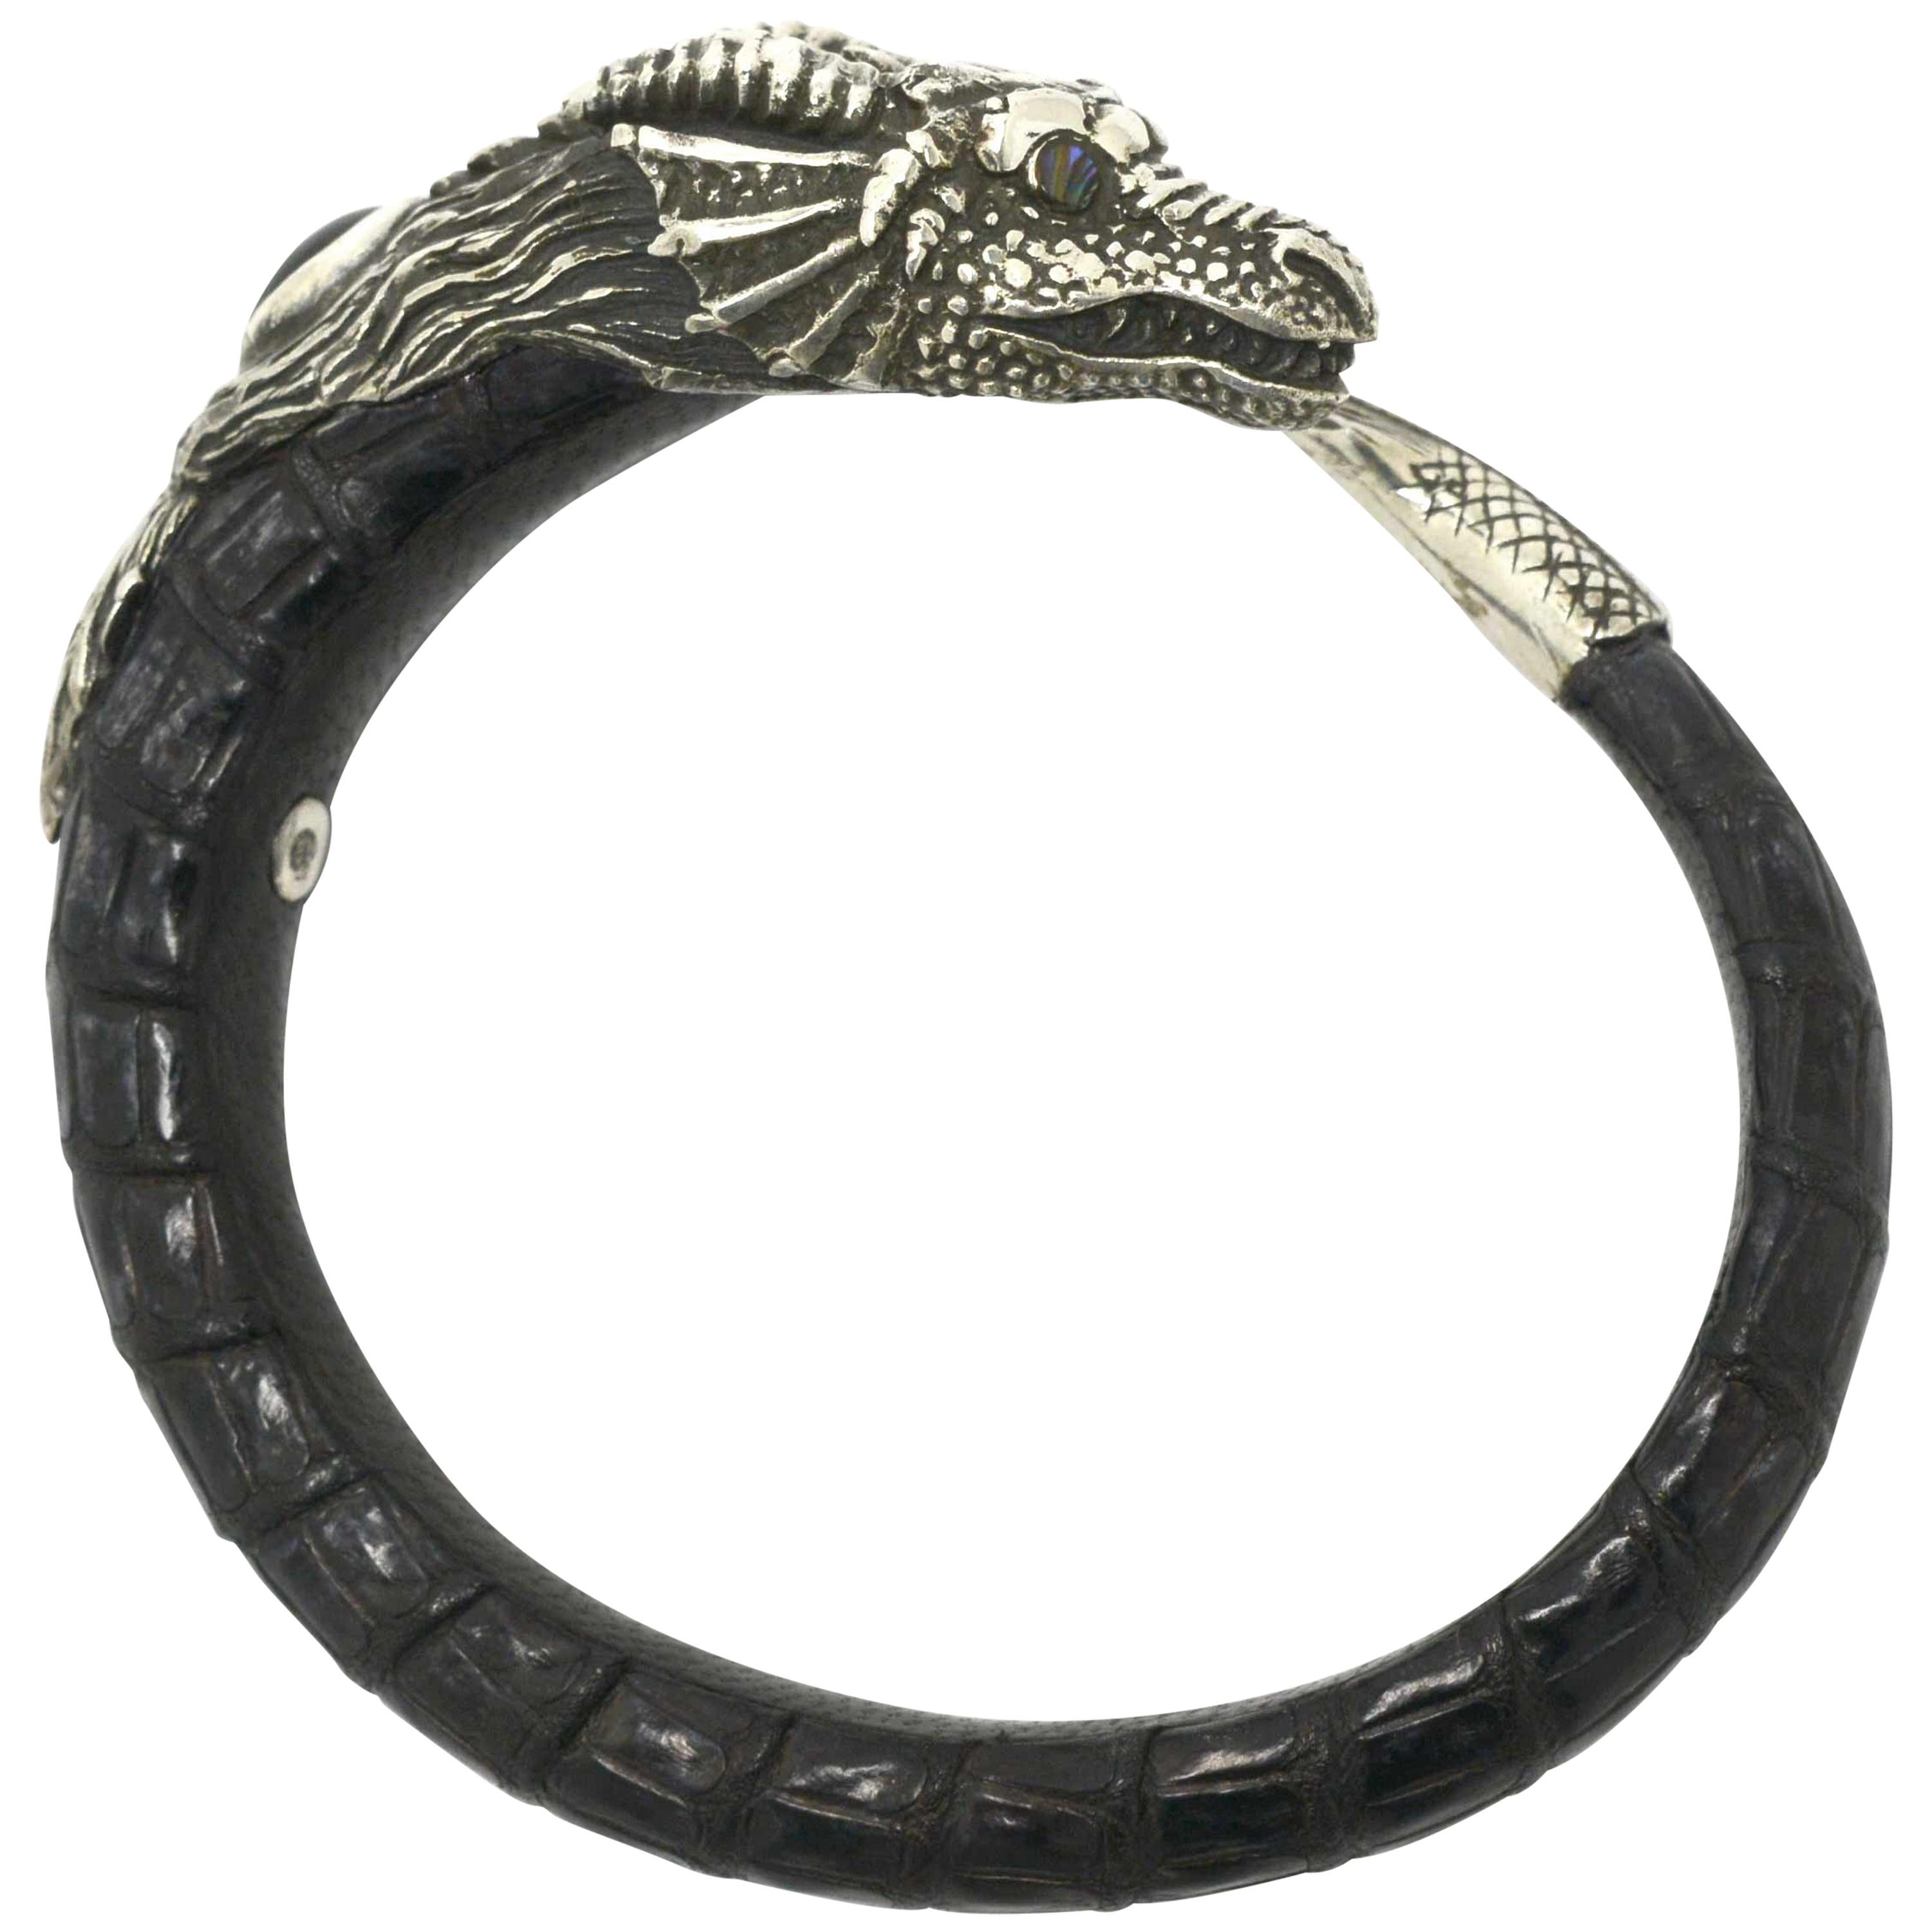 Game of Thrones Dragon Bracelet Ostrich Leather Sterling Silver Arm Cuff Bangle